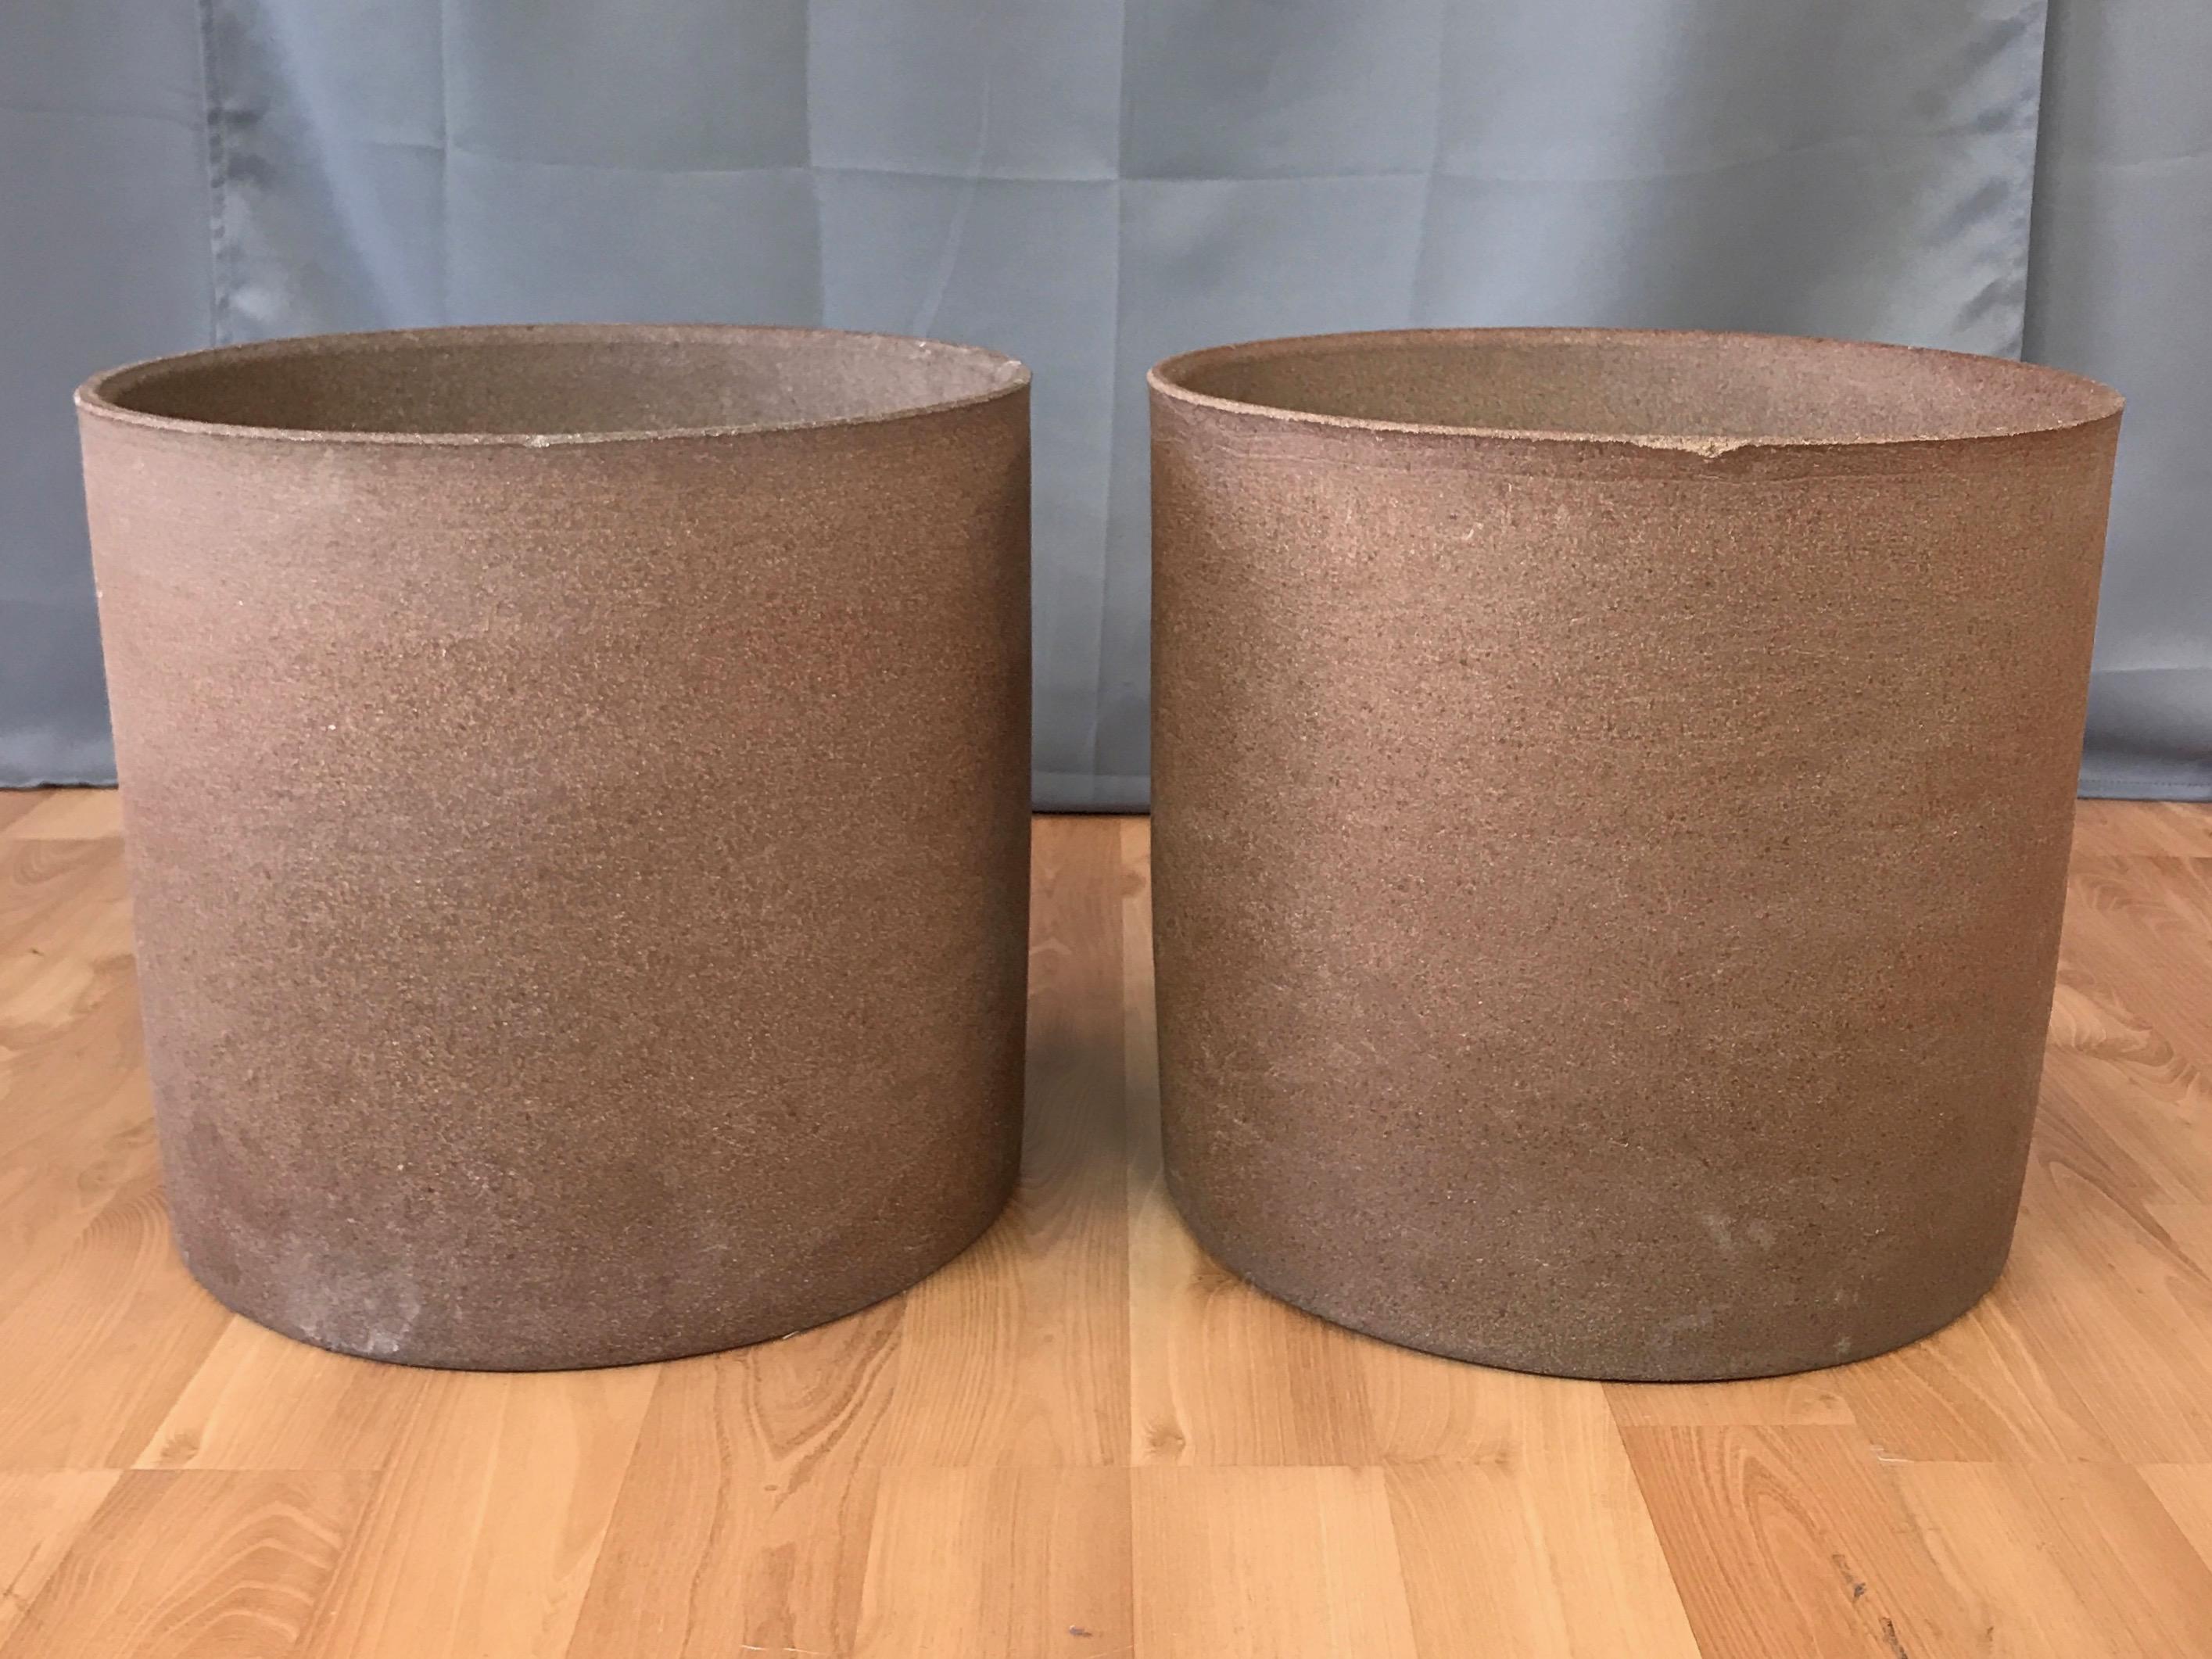 Large cylindrical unglazed stoneware planters by David Cressey from his 1960s Pro/Artisan collection for Architectural Pottery, offered individually.

Minimalist straight-sided form resembles an oversized earthen core sample, allowing one to imagine